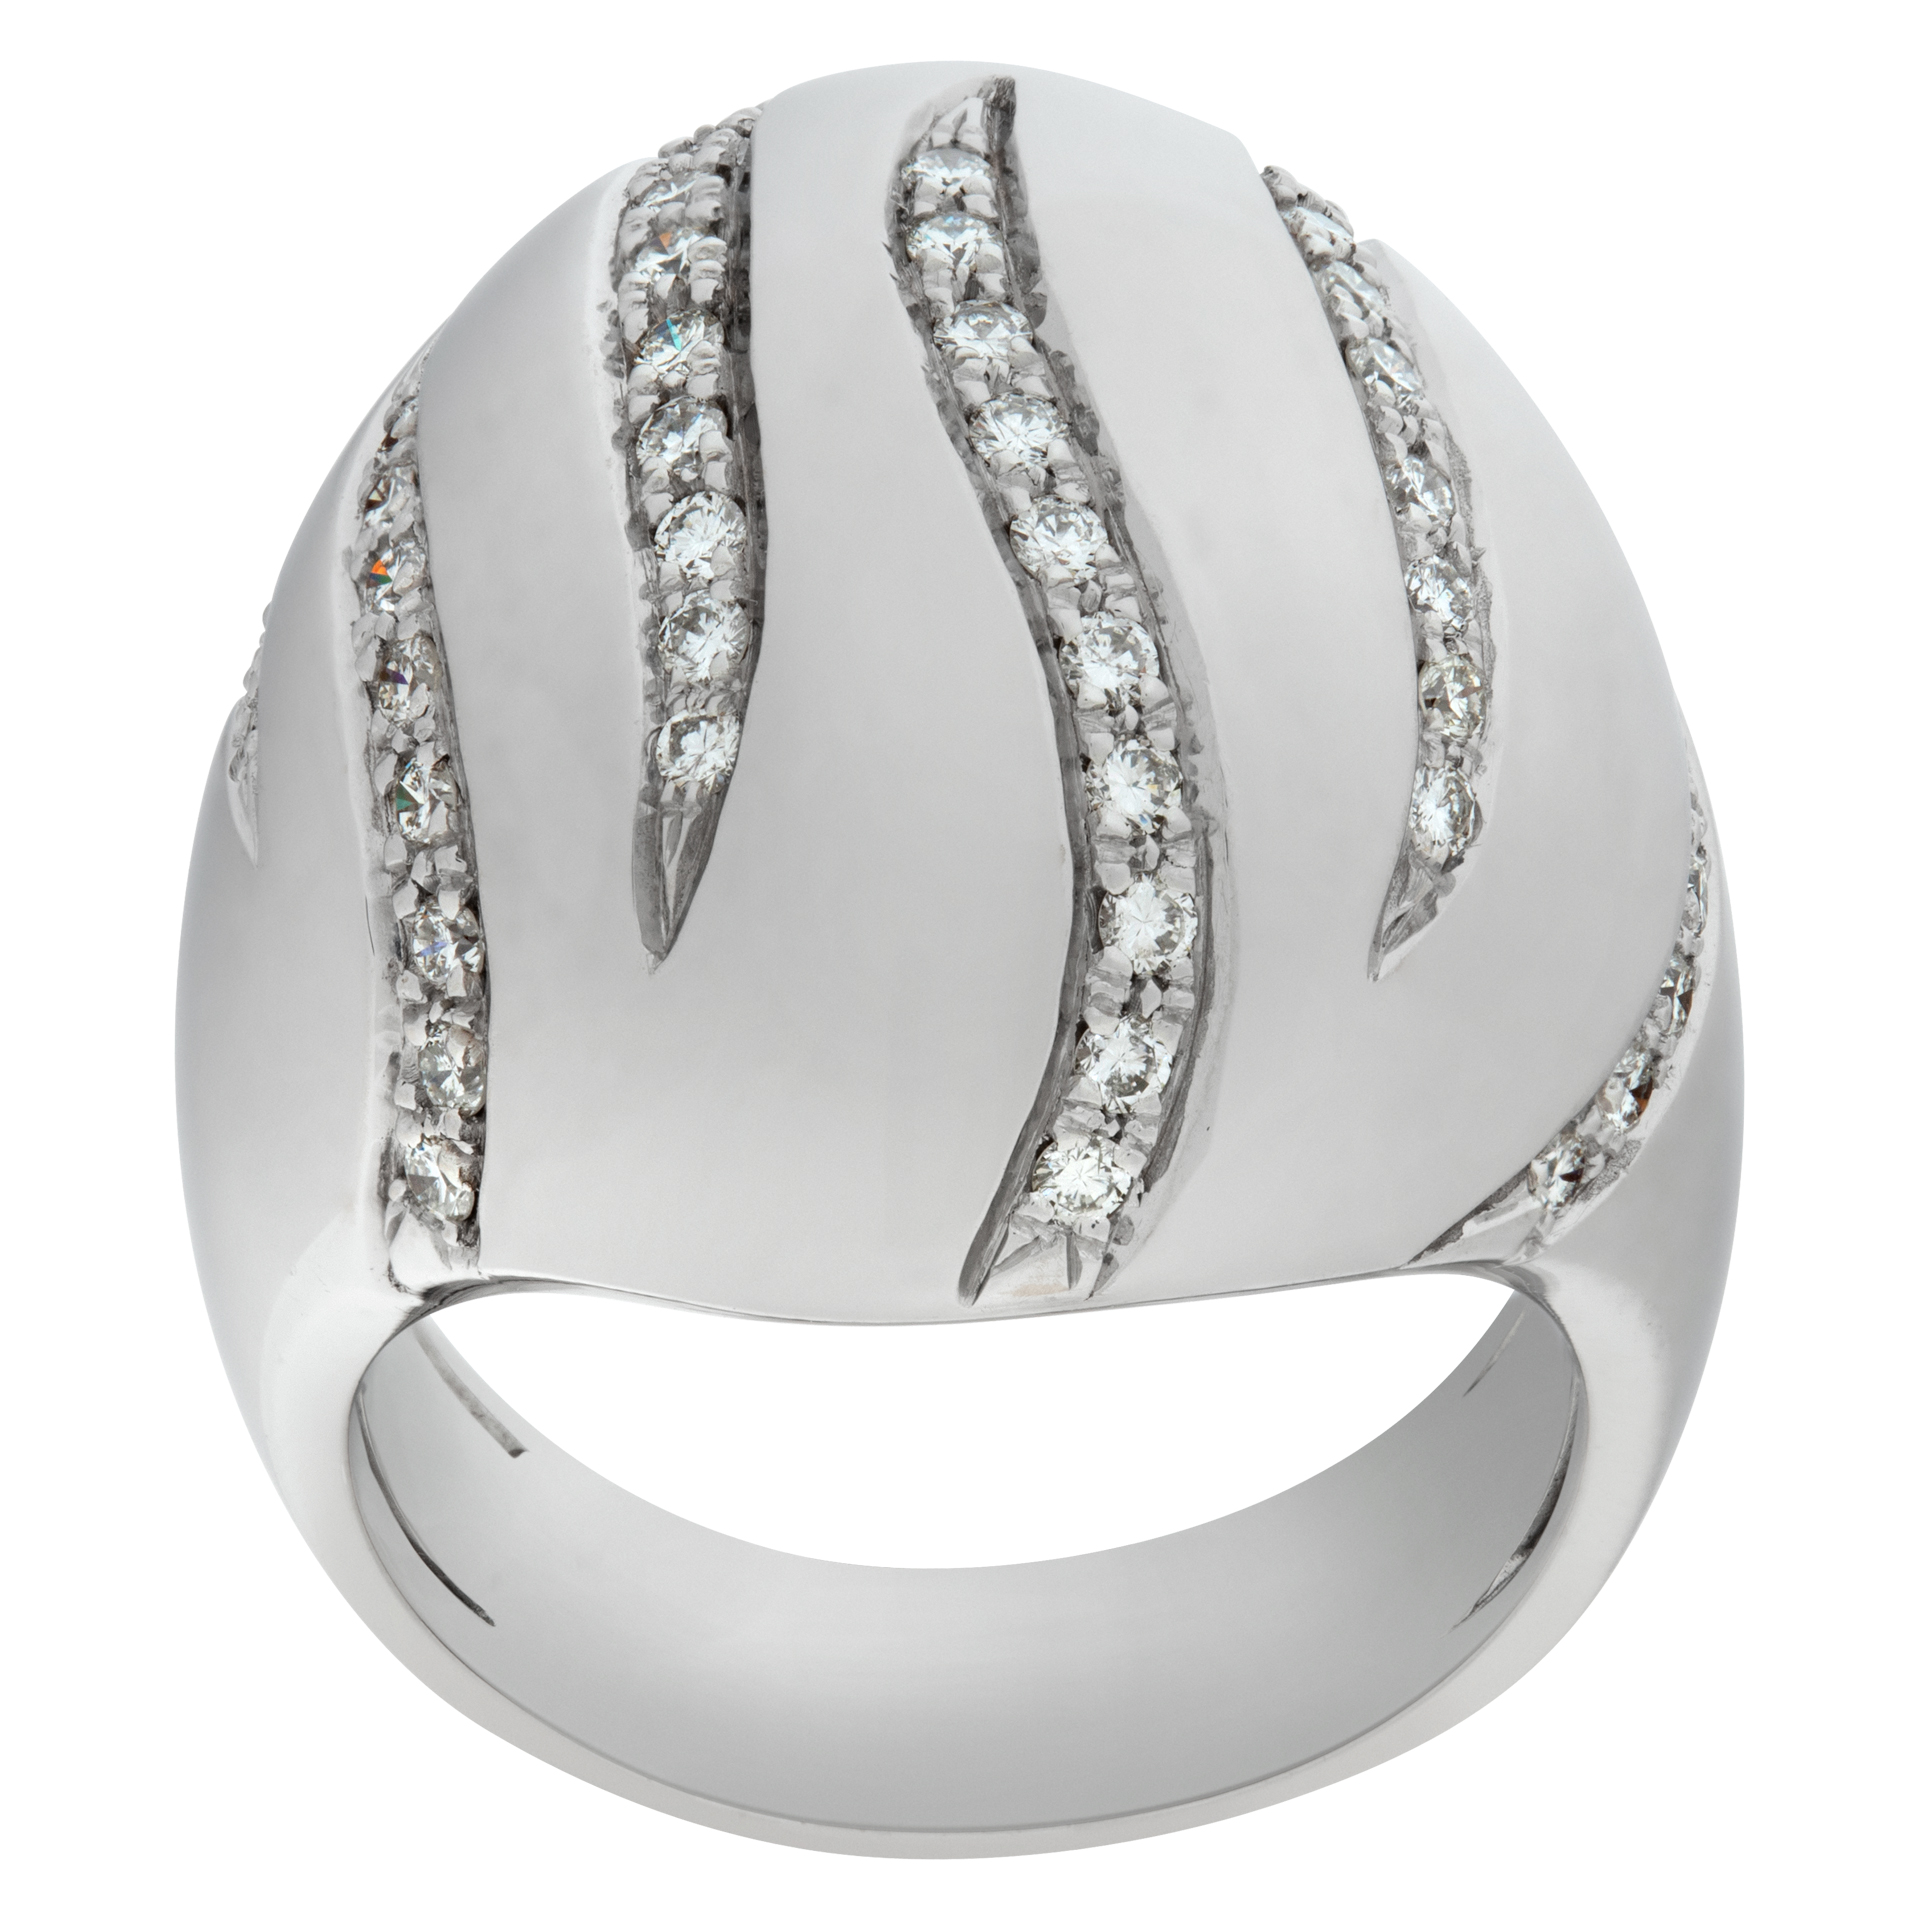 Domed ring in 18k white gold and diamonds. Round brilliant cut diamonds total approx. weight: 0.53 carat,